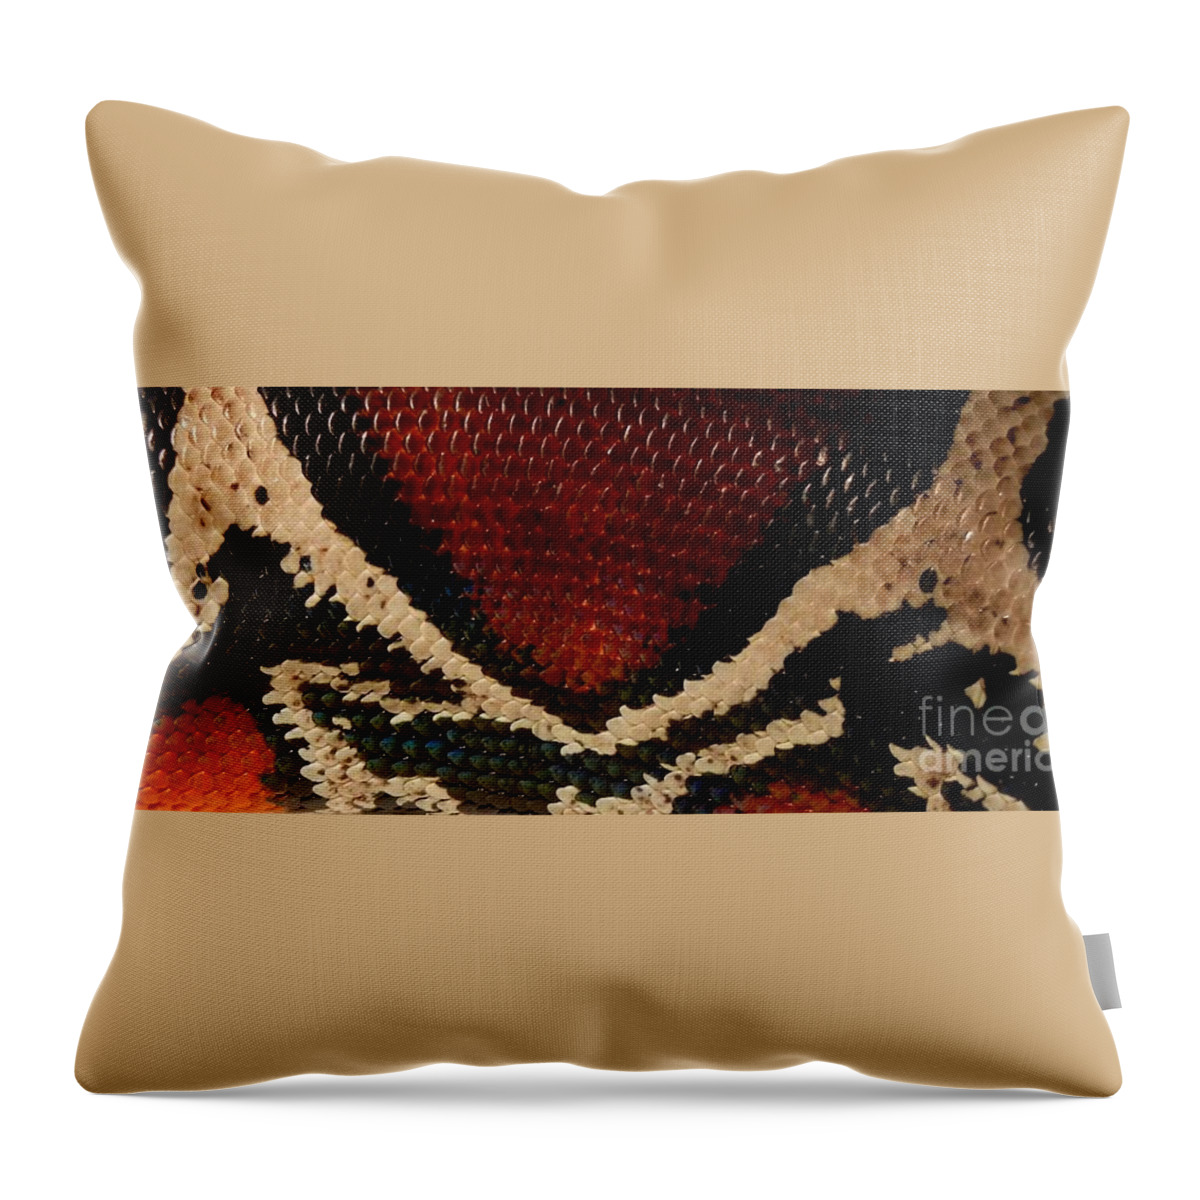 Snake Throw Pillow featuring the photograph Snake's Scales by KD Johnson